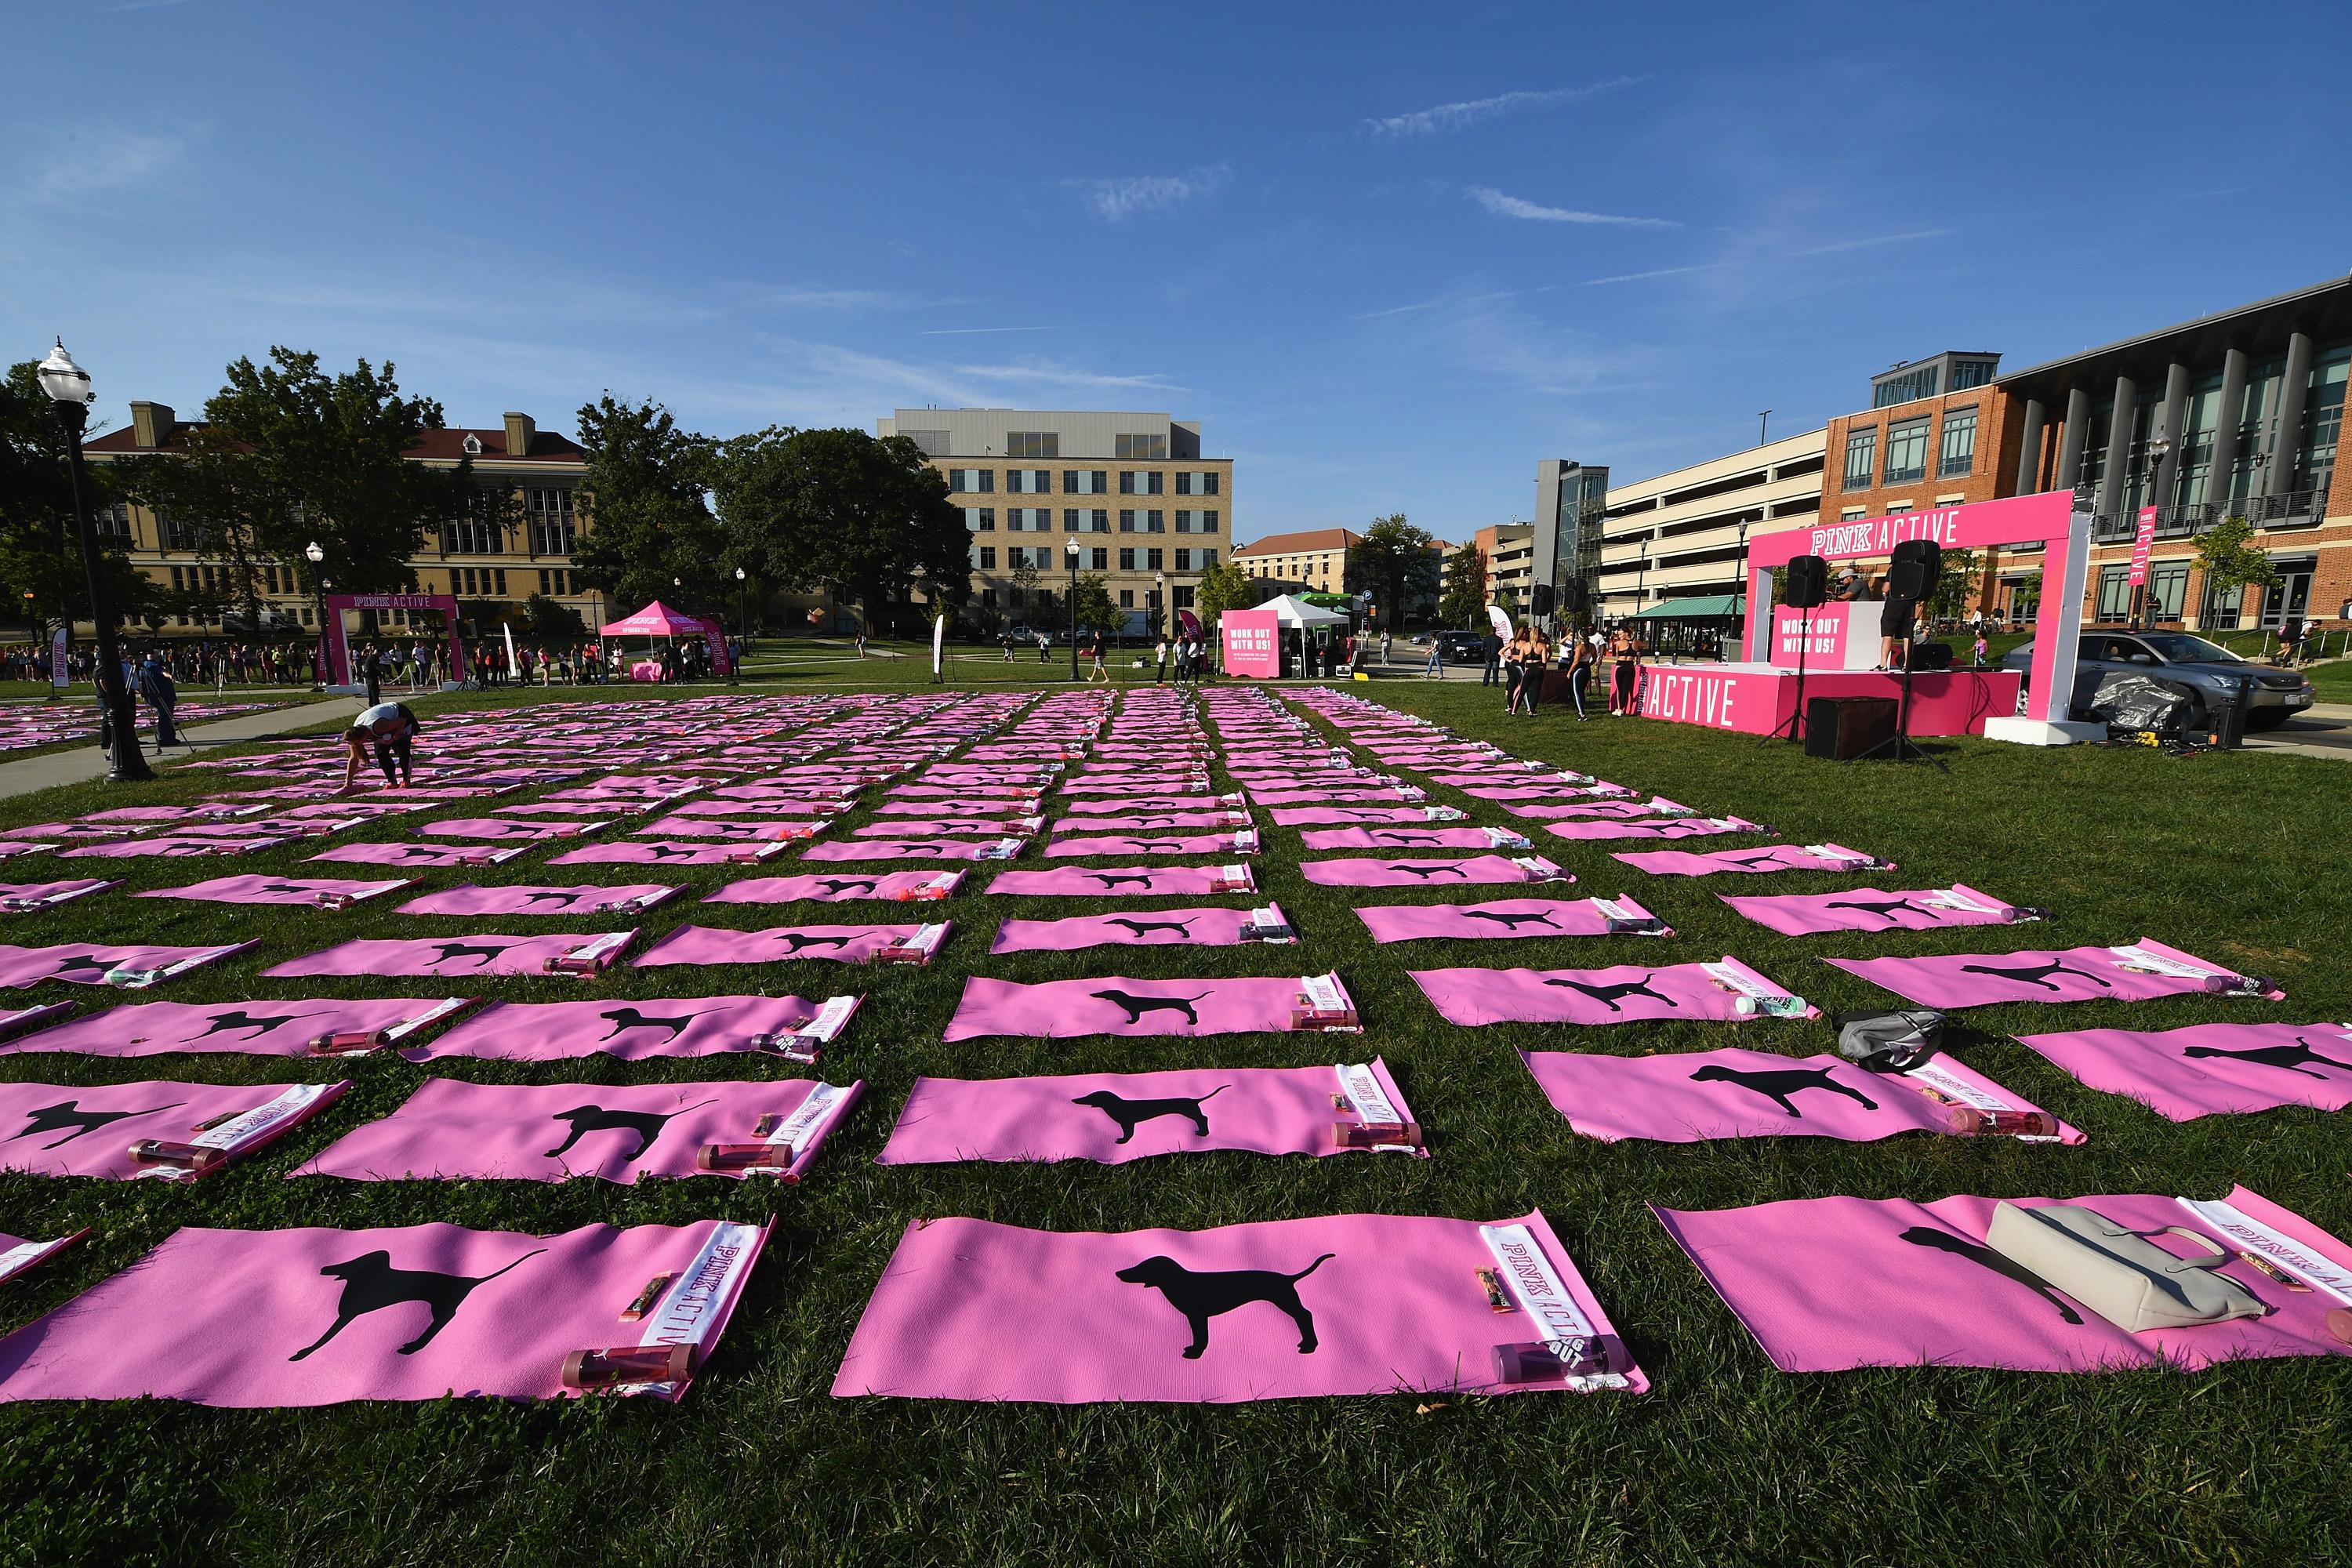 A view of the campus at Ohio State University, where Victoria's Secret's Pink held an event. A grassy field is covered in pink yoga mats, and there is a pink stage at the front of the field. 